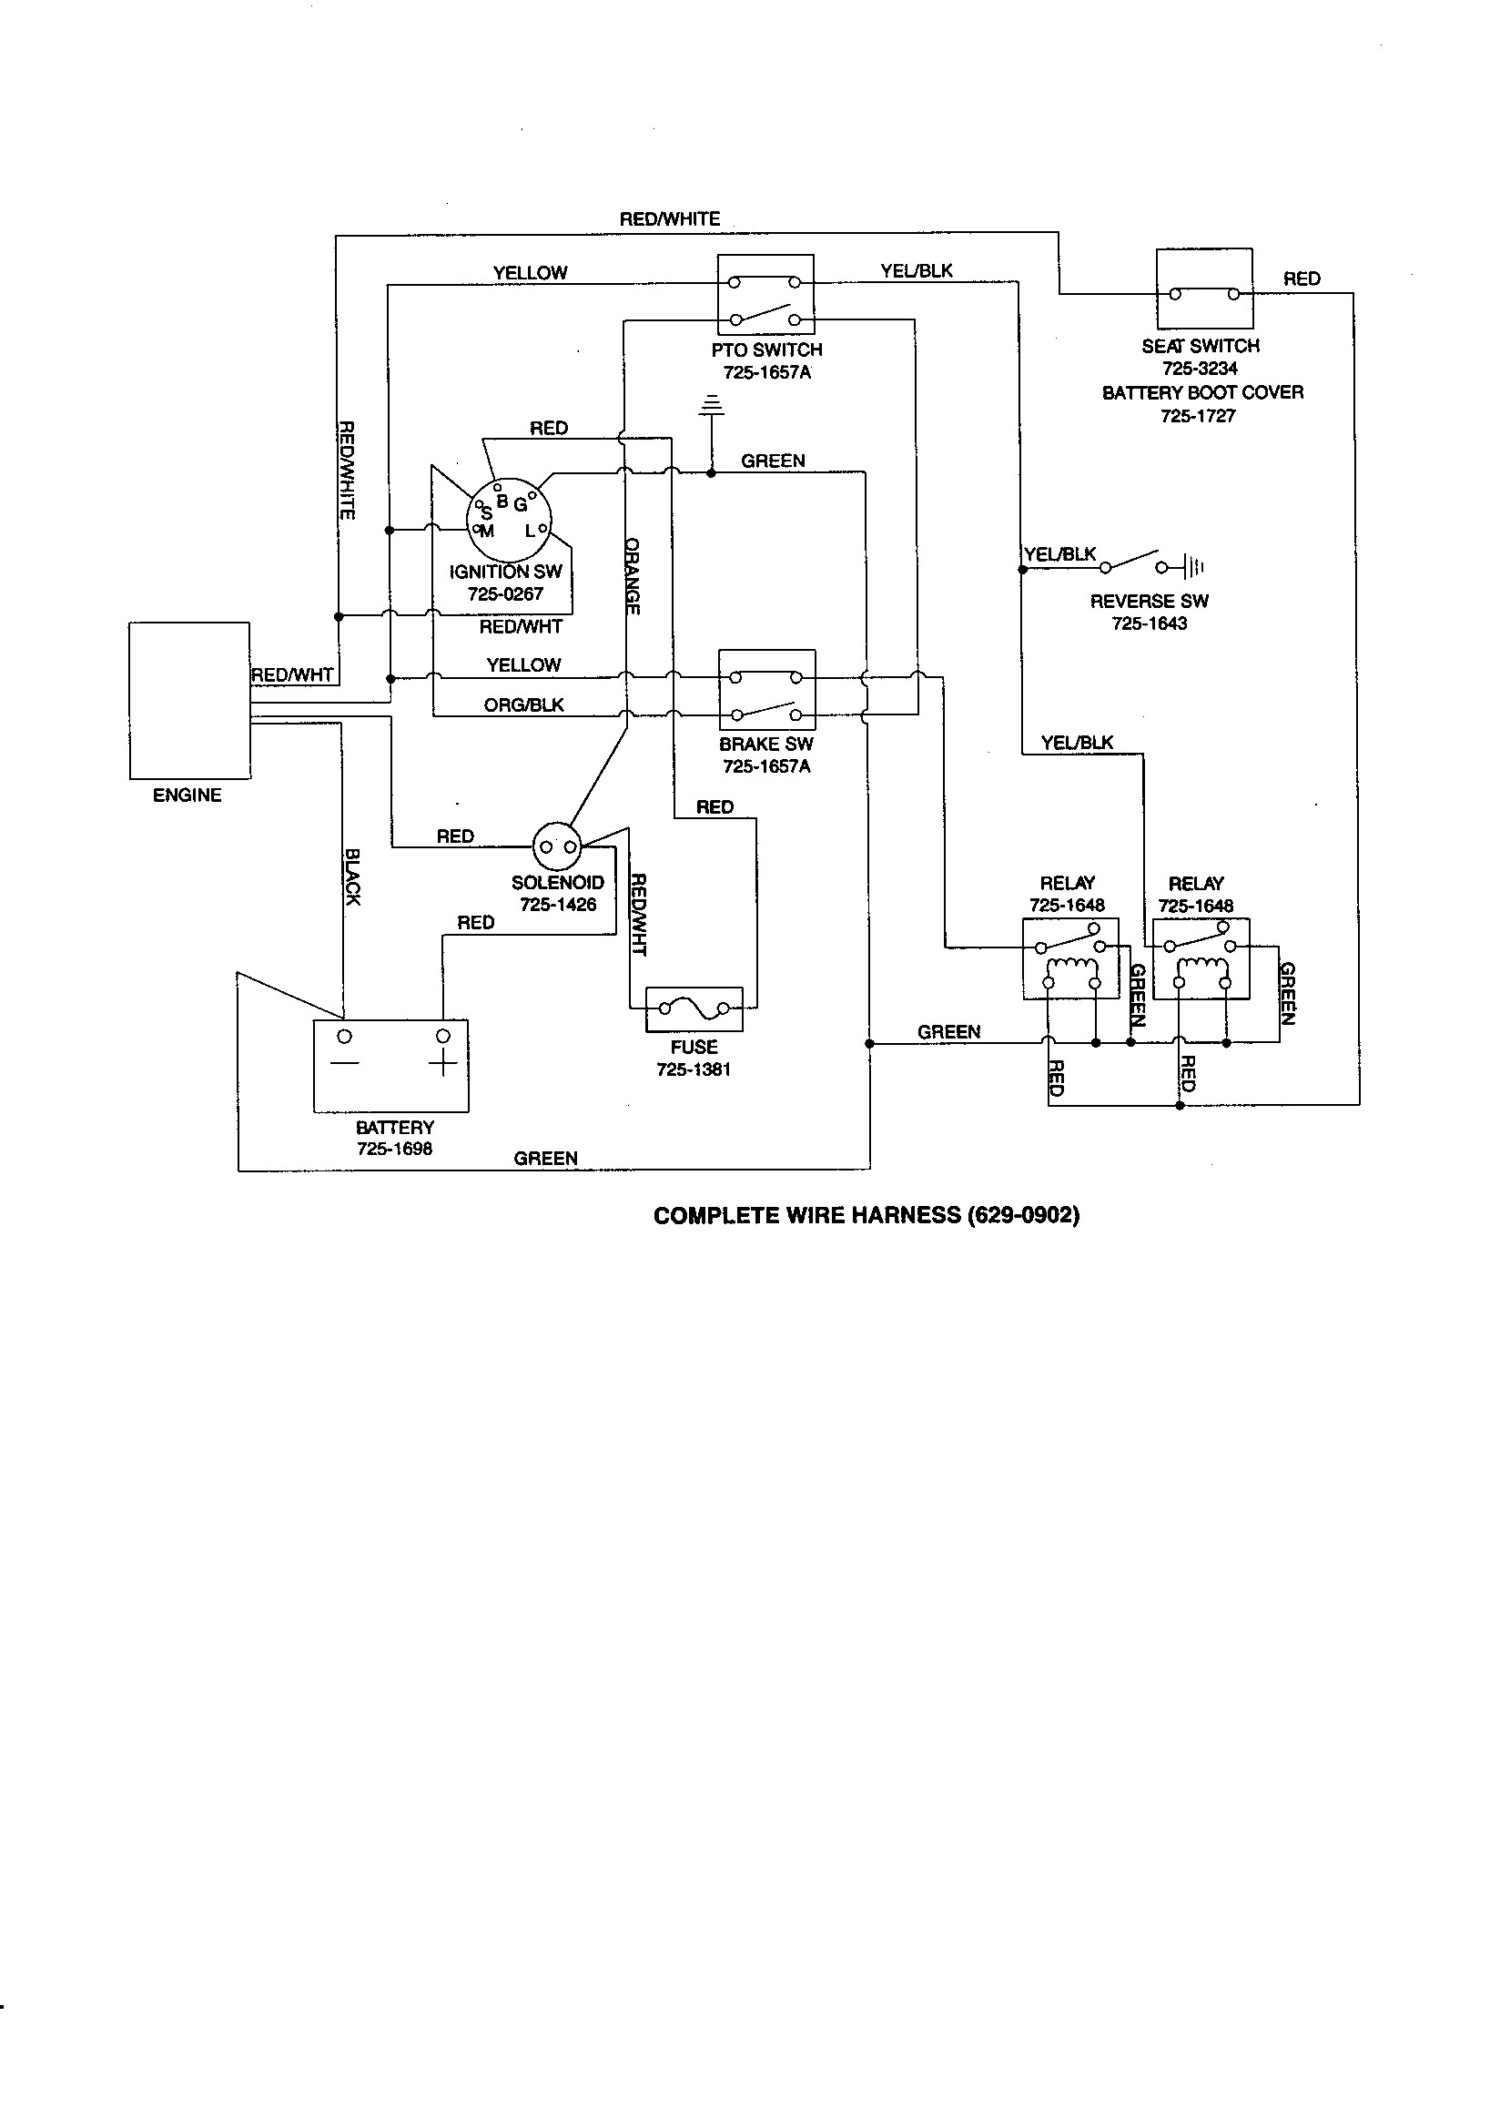 John Deere Lt160 Wiring Diagram Lawn Mower Ignition Switch Wiring Diagram Amazing for and Picture Of John Deere Lt160 Wiring Diagram